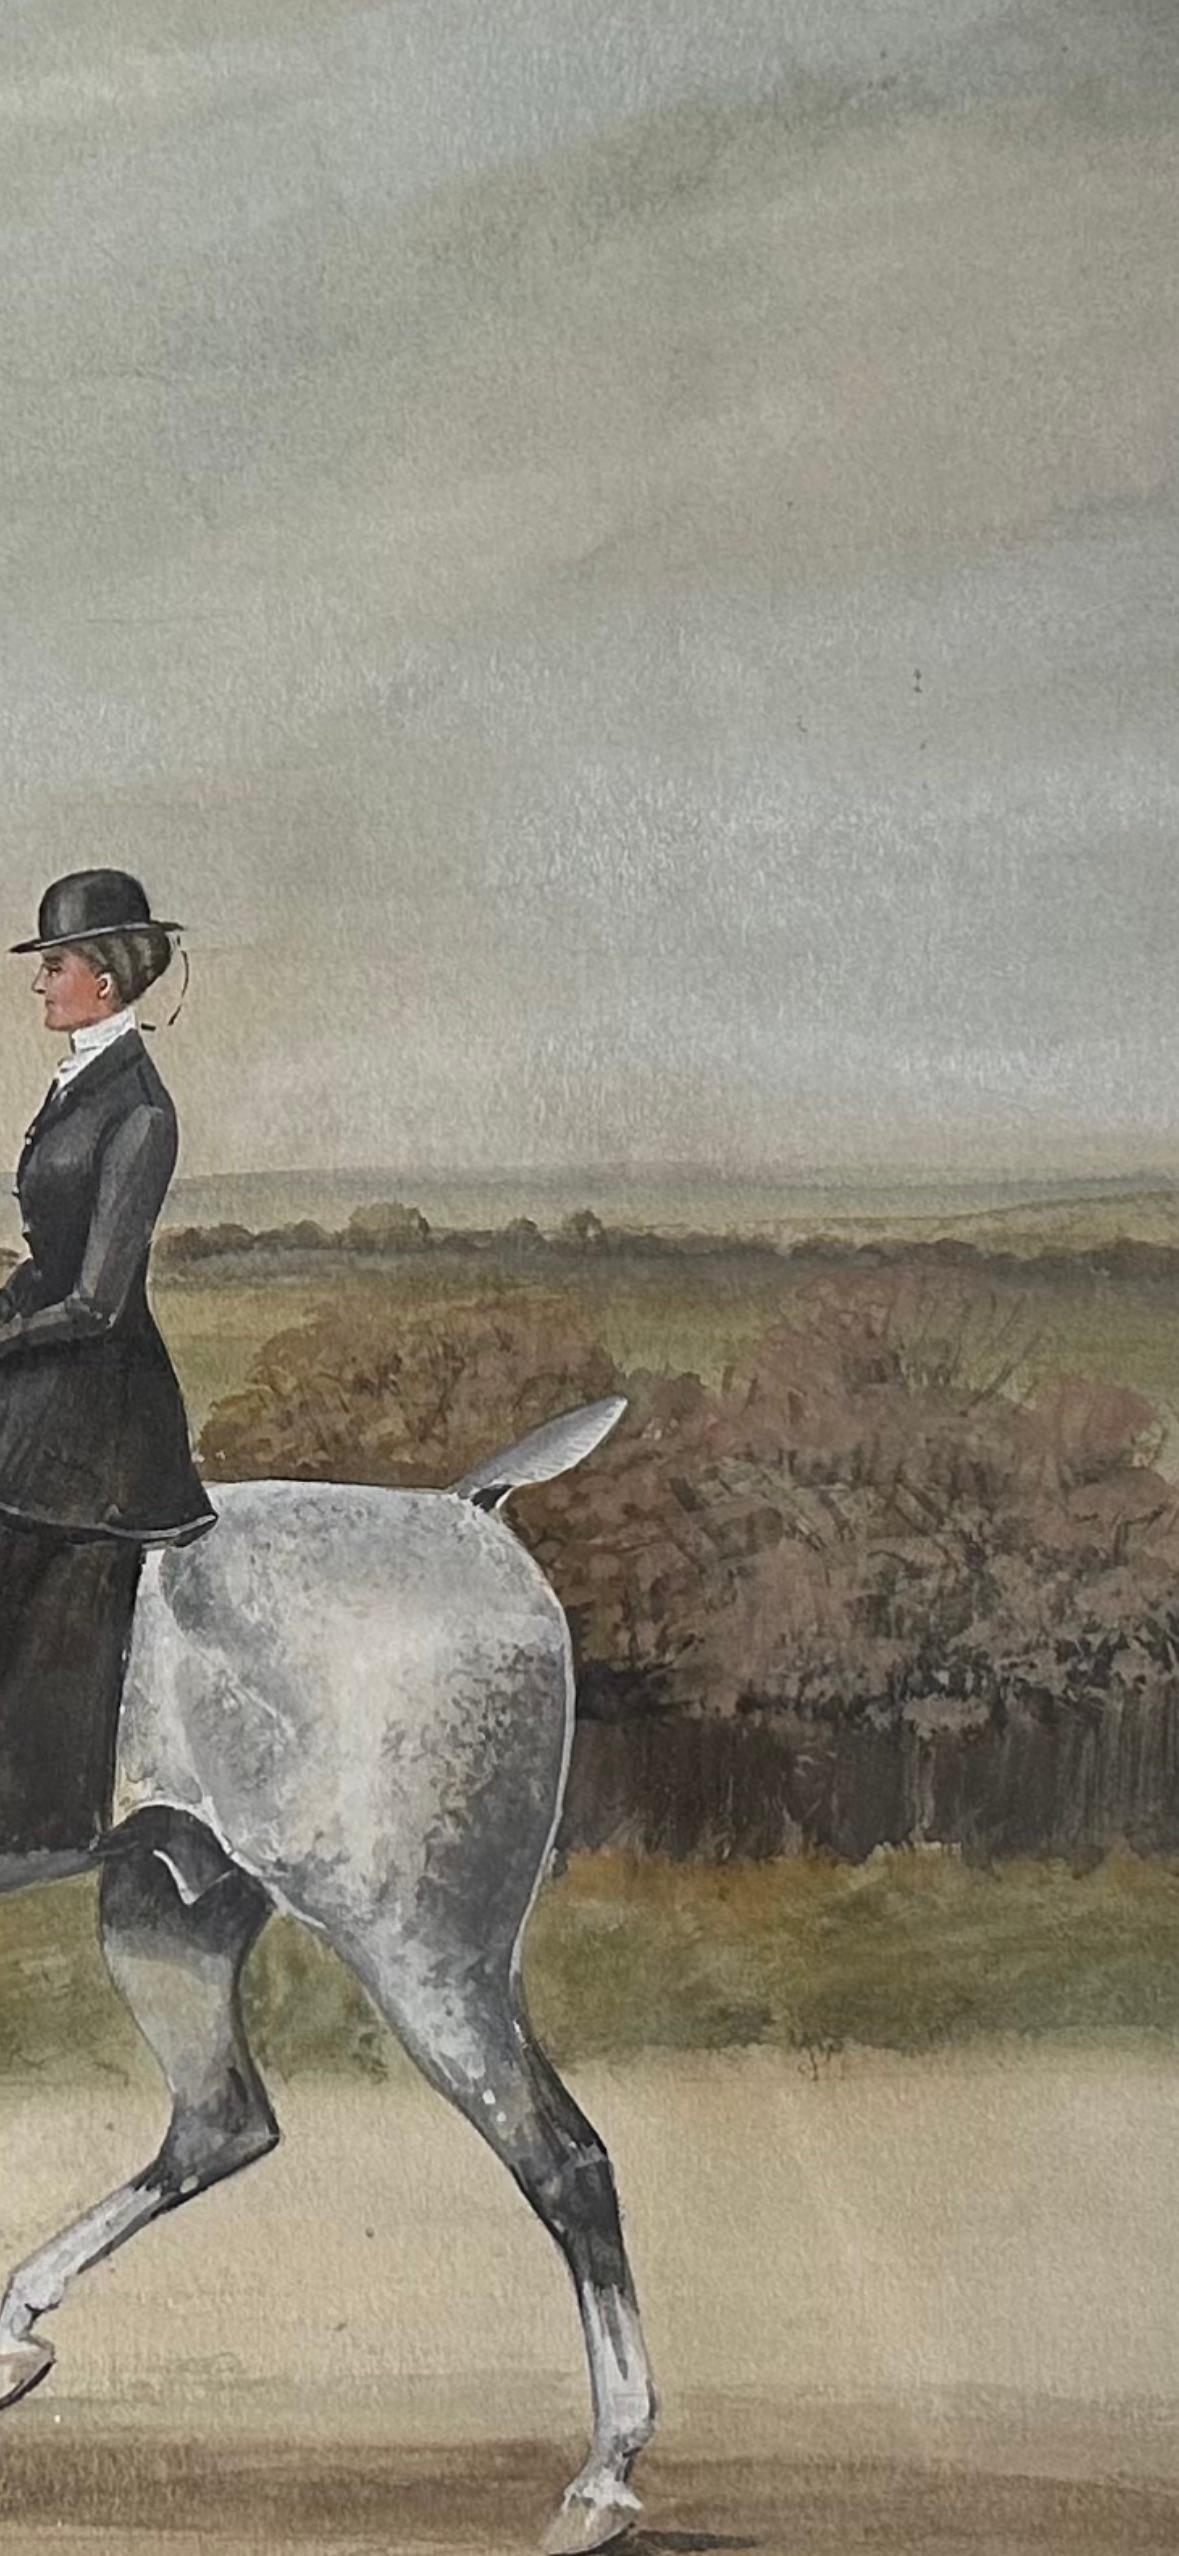 Henry William Standing (British, 1894-1931) Equine Painting, watercolor and gouache on paper. Depicting an English Lady riding Dressage Side Saddle. Signed and dated 1905